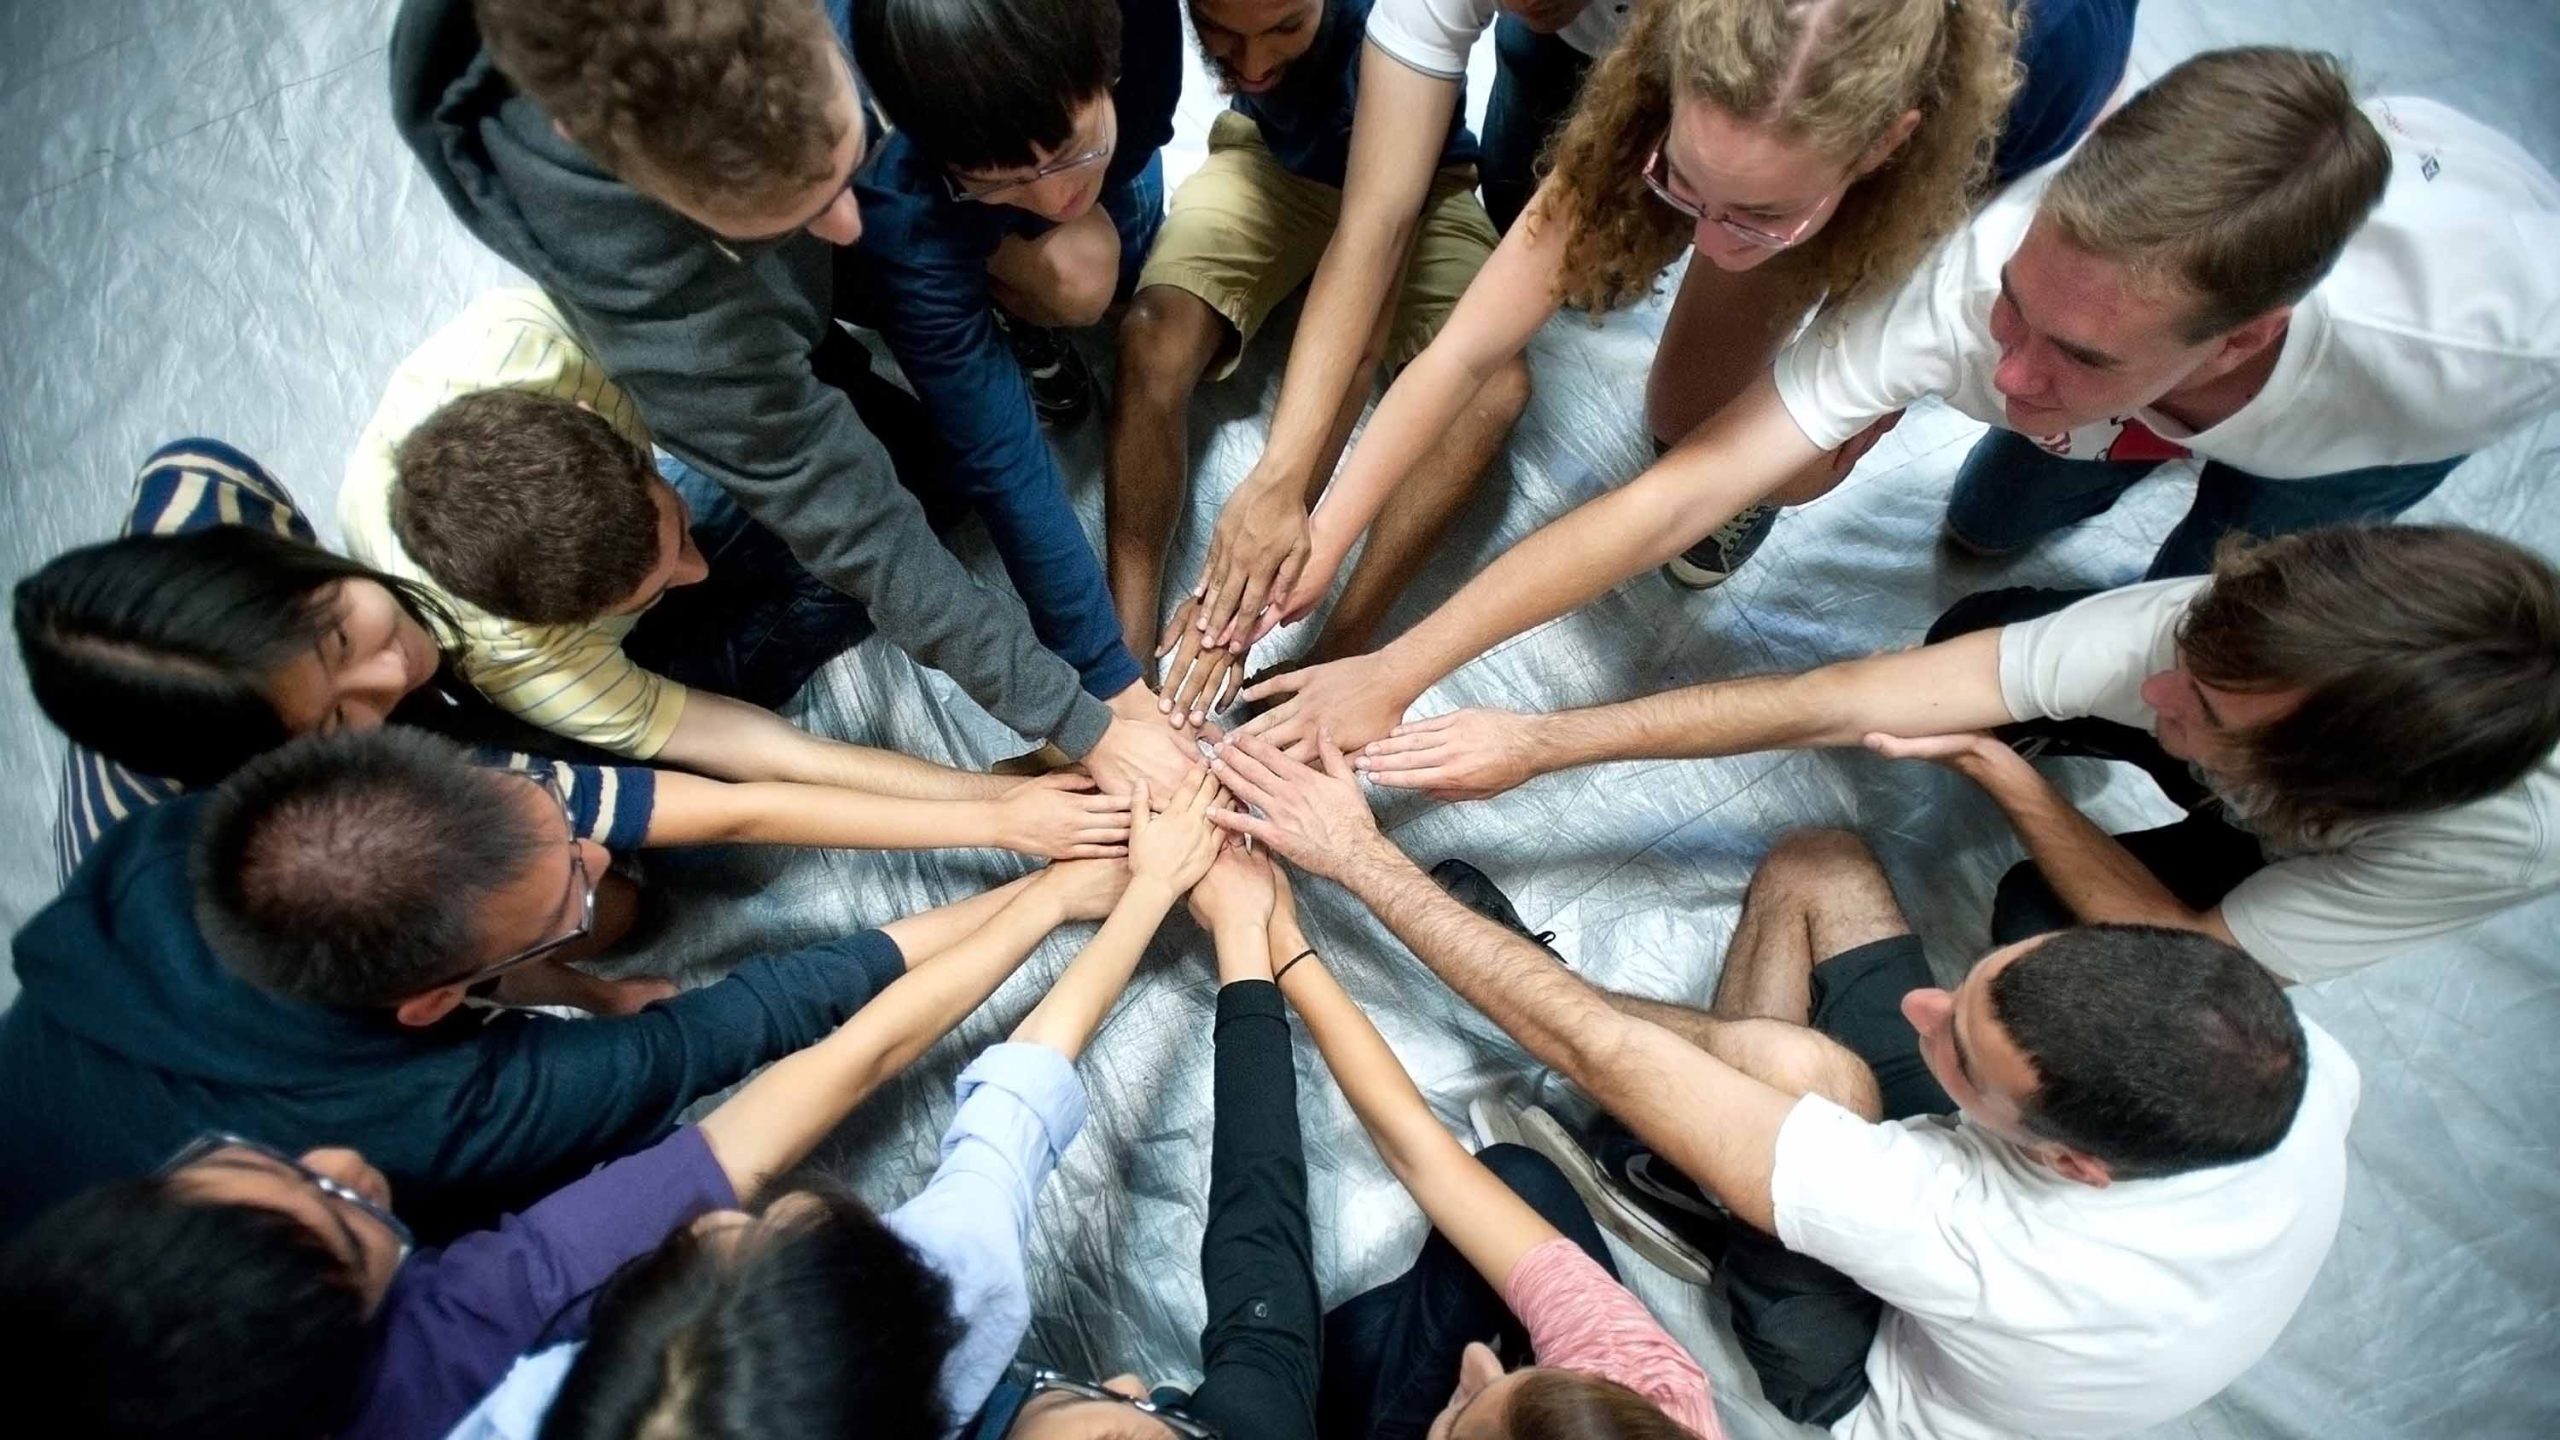 Students forming a circle and joining hands in the center.